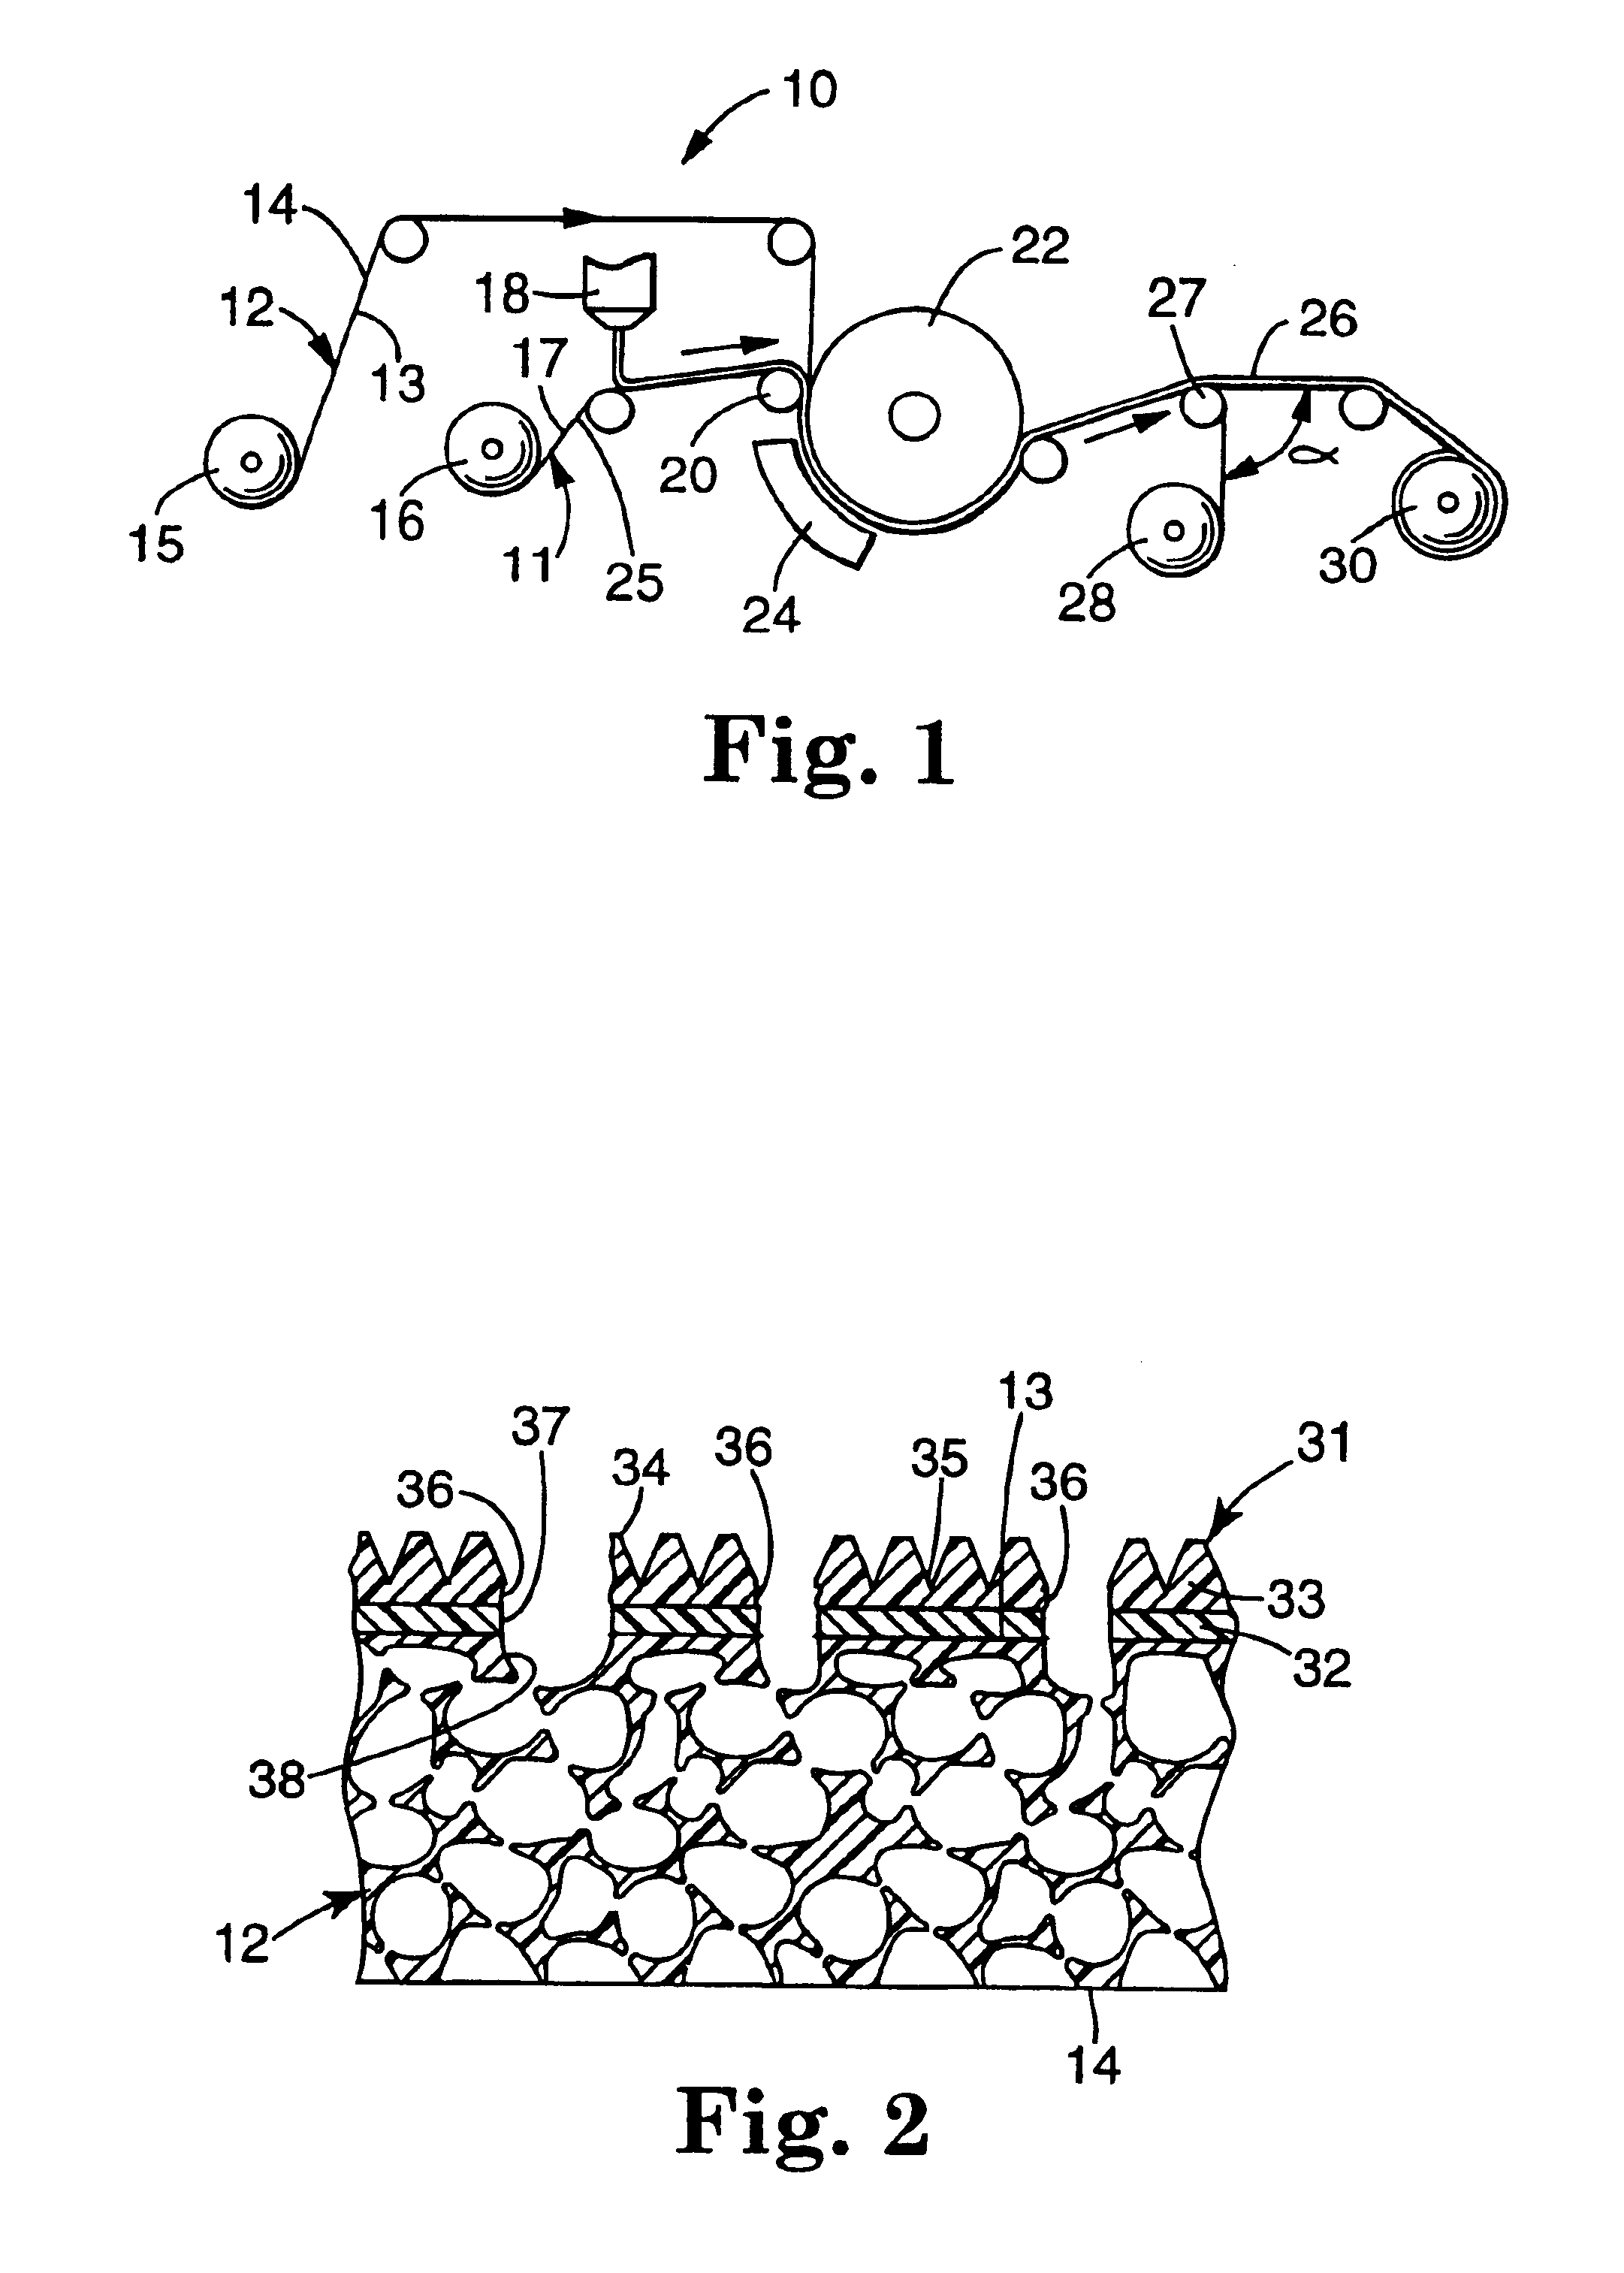 Flexible abrasive product and method of making and using the same